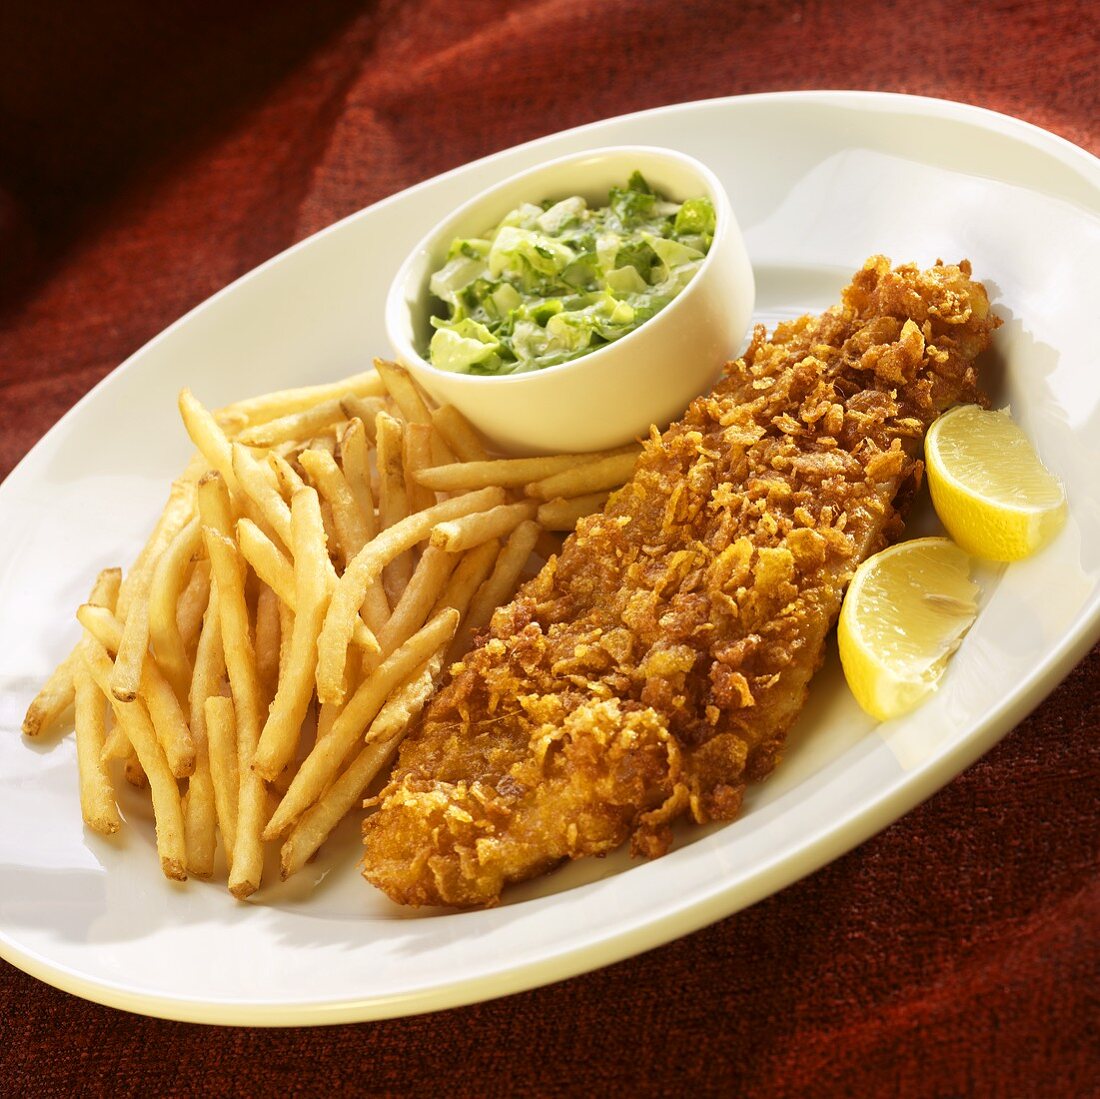 Cornflake Coated Fish Fillet with Fries and Cole Slaw; Lemon Wedges